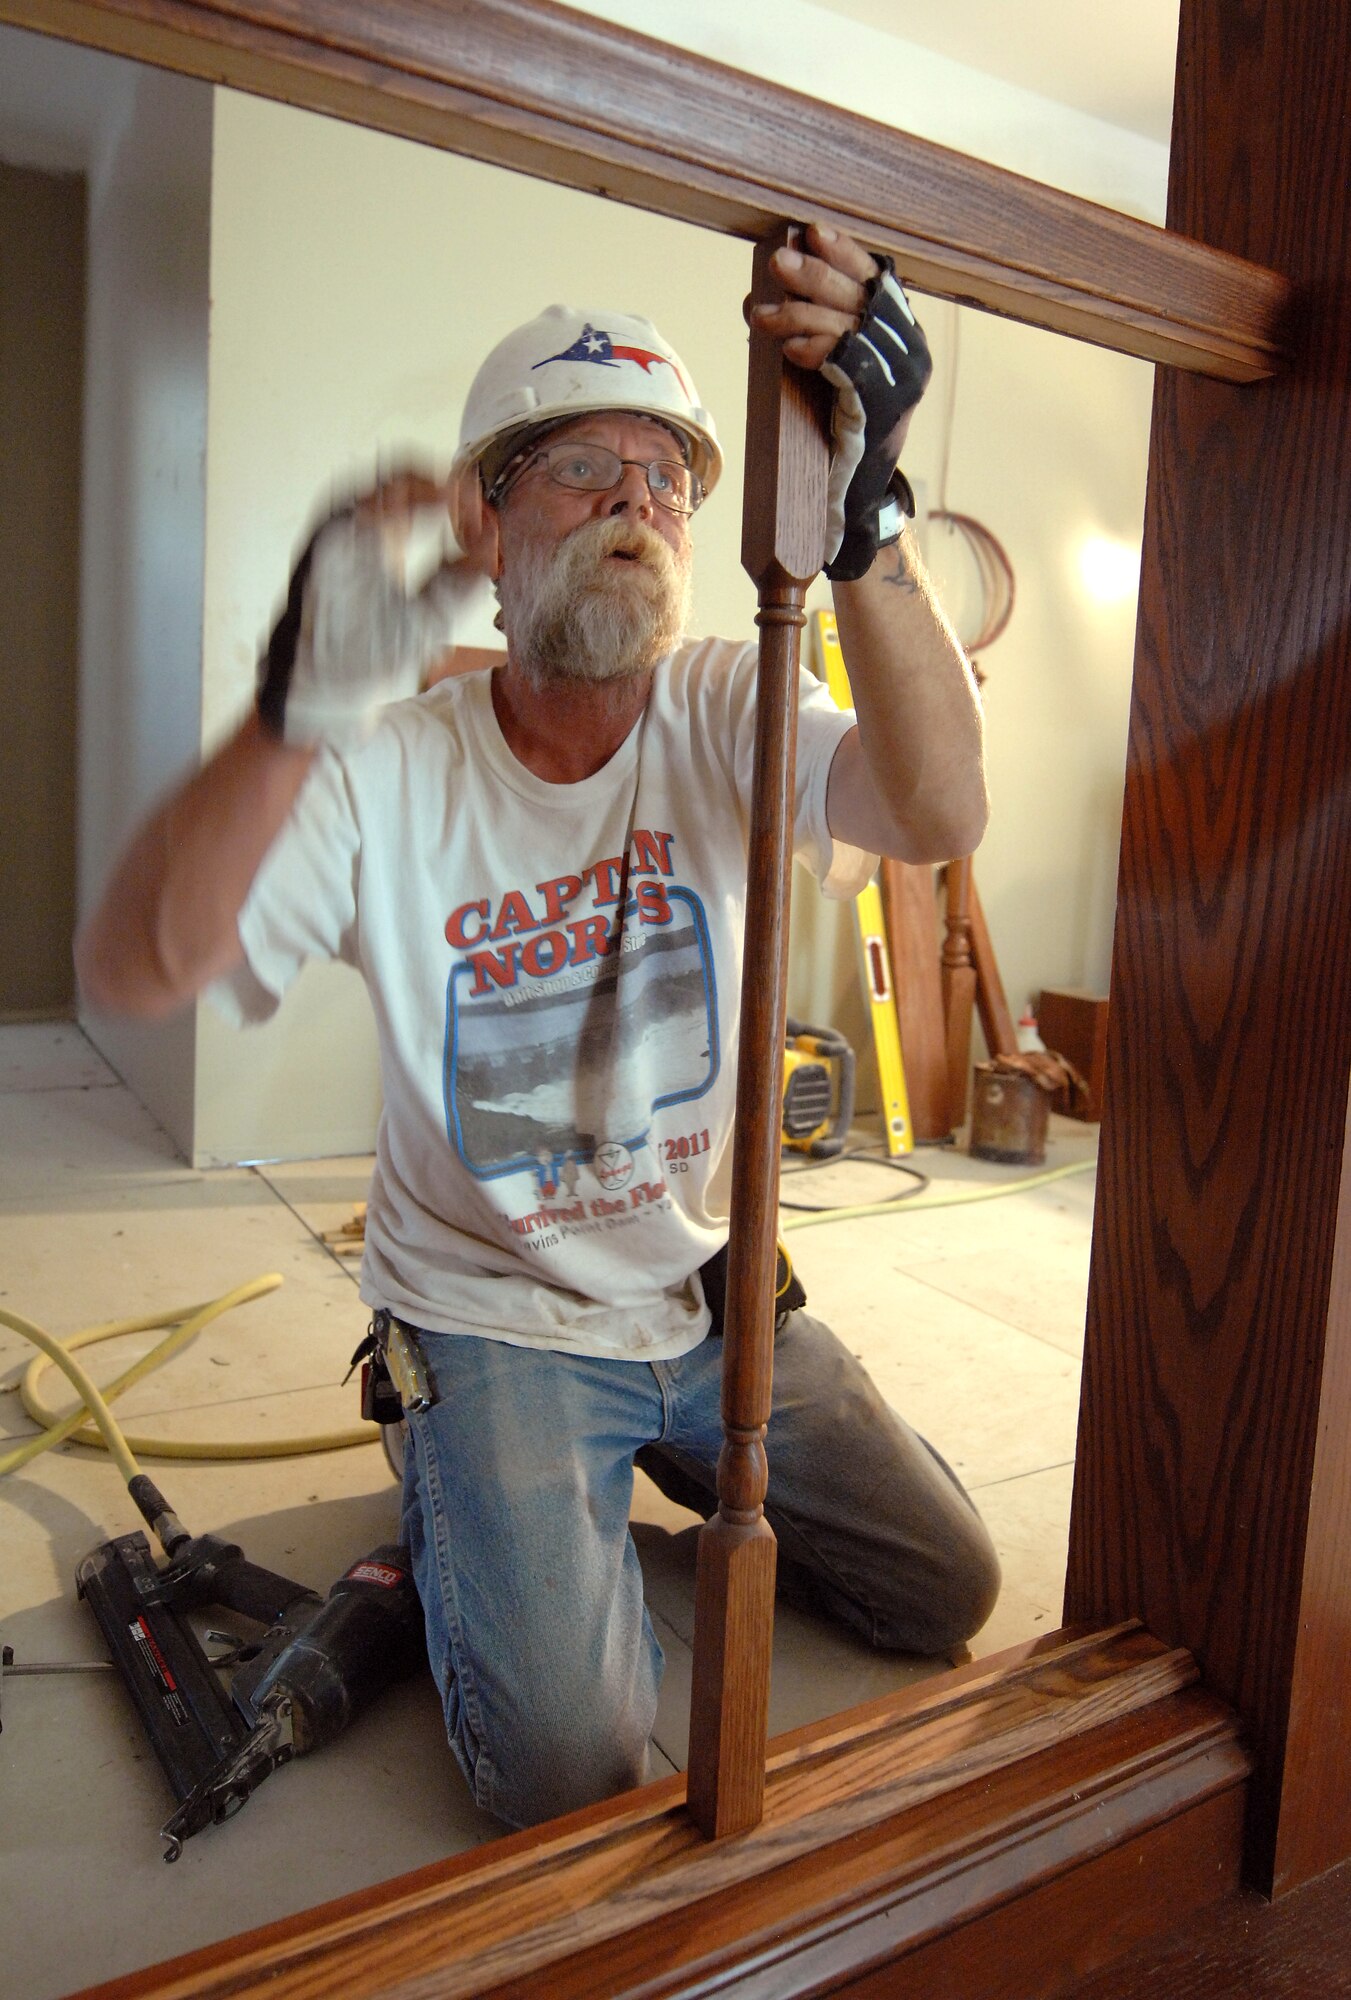 Jim Beggs, a contracted carpenter from South Sioux City, Iowa, completes finish work on a hand rail inside Building 49. The building, which was built in 1894, is receiving $5 million in renovations that are scheduled for completion later this summer. The updates will provide 32,000 square feet of office space for the 55th Mission Support Group and 55th Force Support Squadron. (U.S. Air Force photo/Delanie Stafford)